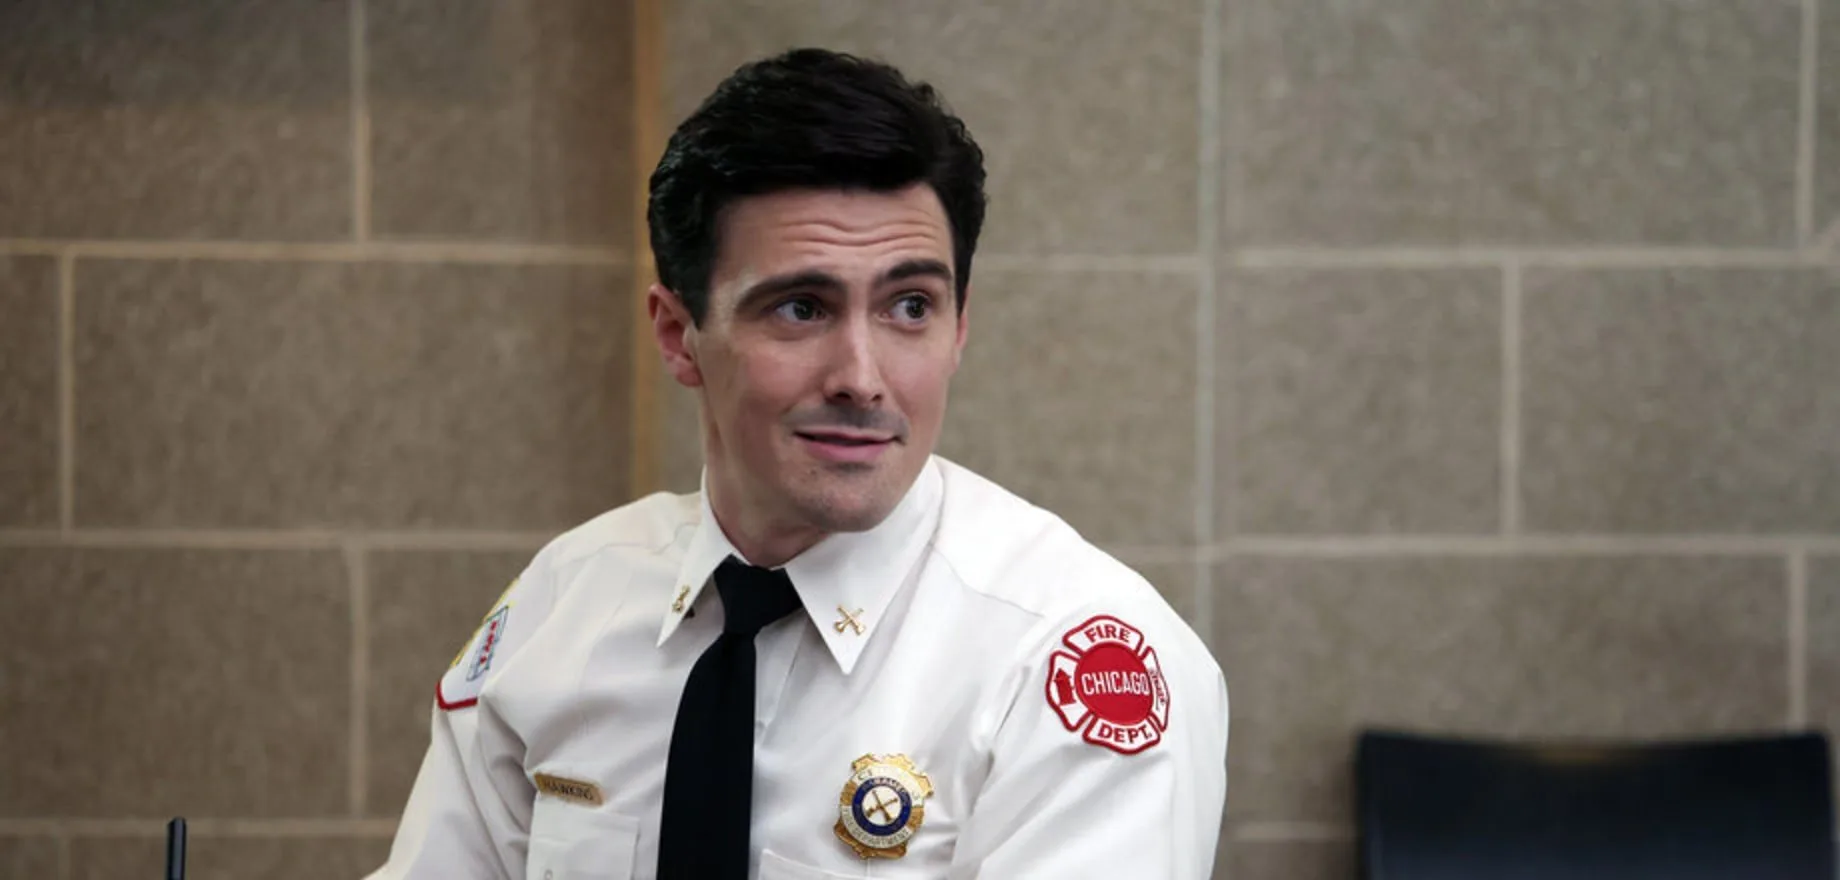 What Happened To Evan Hawkins On Chicago Fire? All About His Untimely Death Revealed